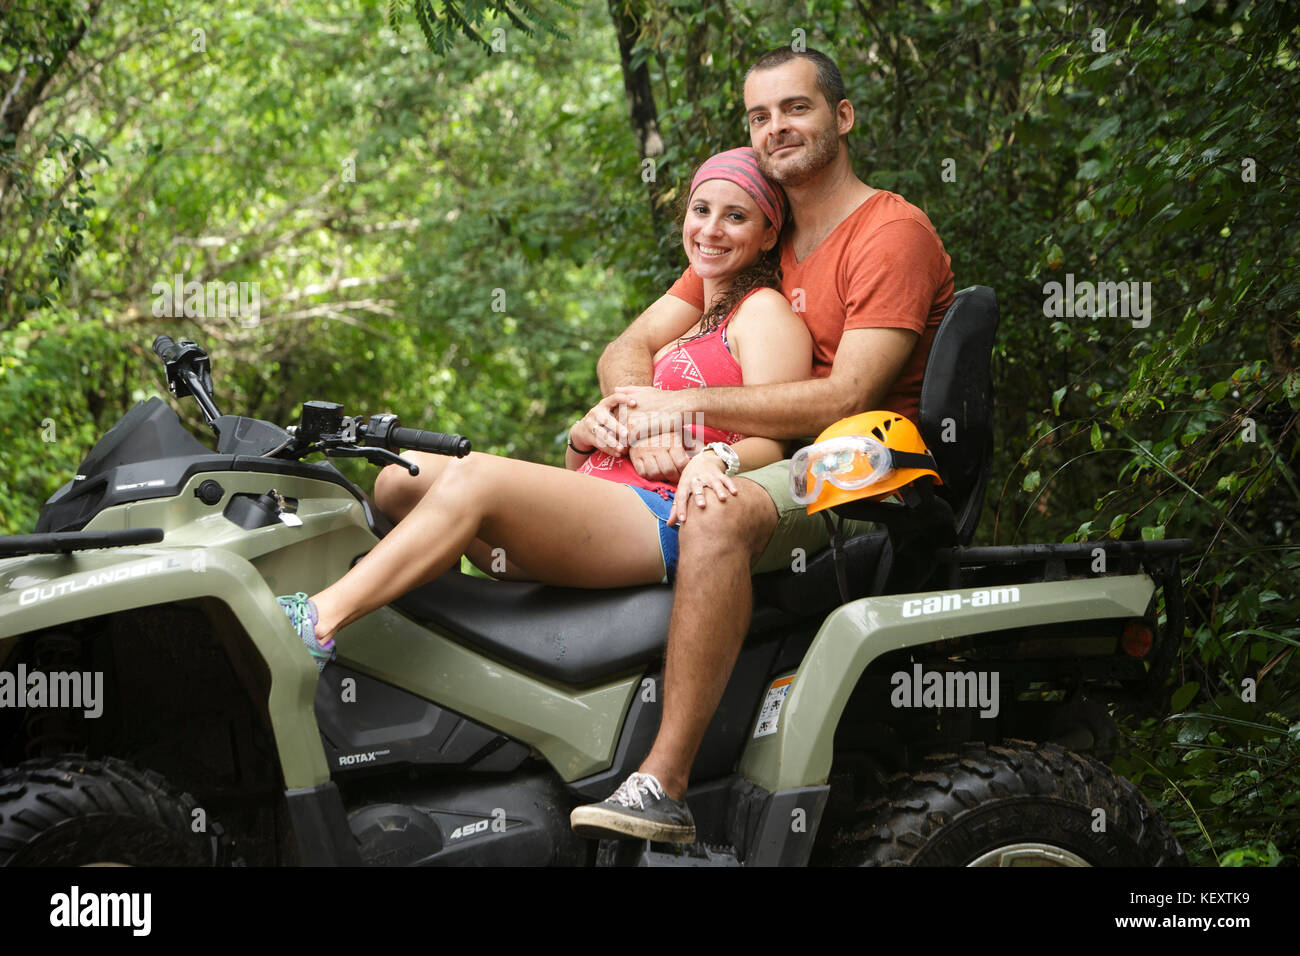 Couple smiling and embracing while sitting on quad bike in Emotions Native Park, Quintana Roo, Mexico Stock Photo